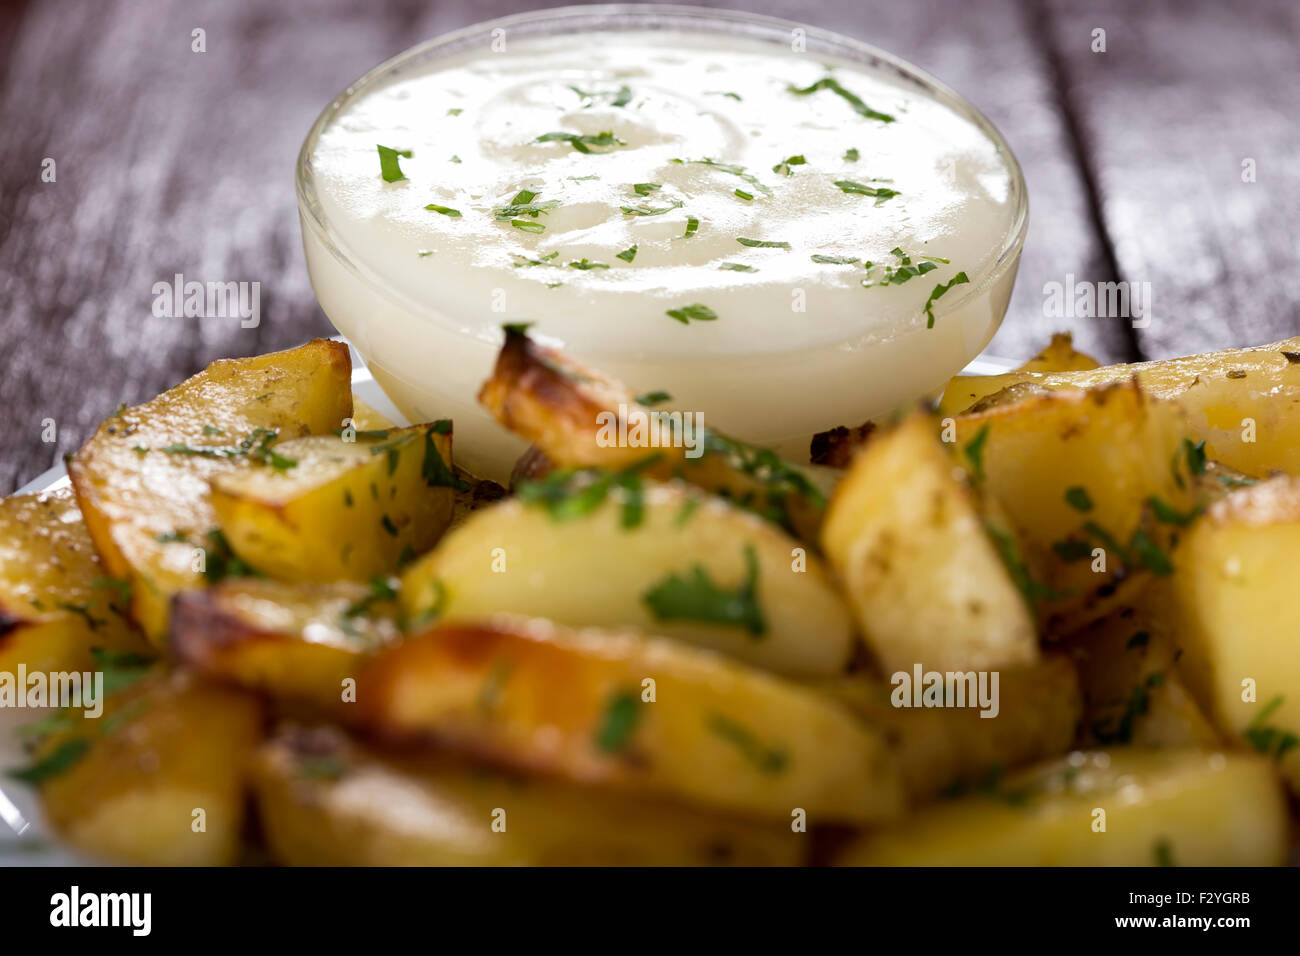 Garlic sauce in bowl and some backed potatoes out of focus Stock Photo